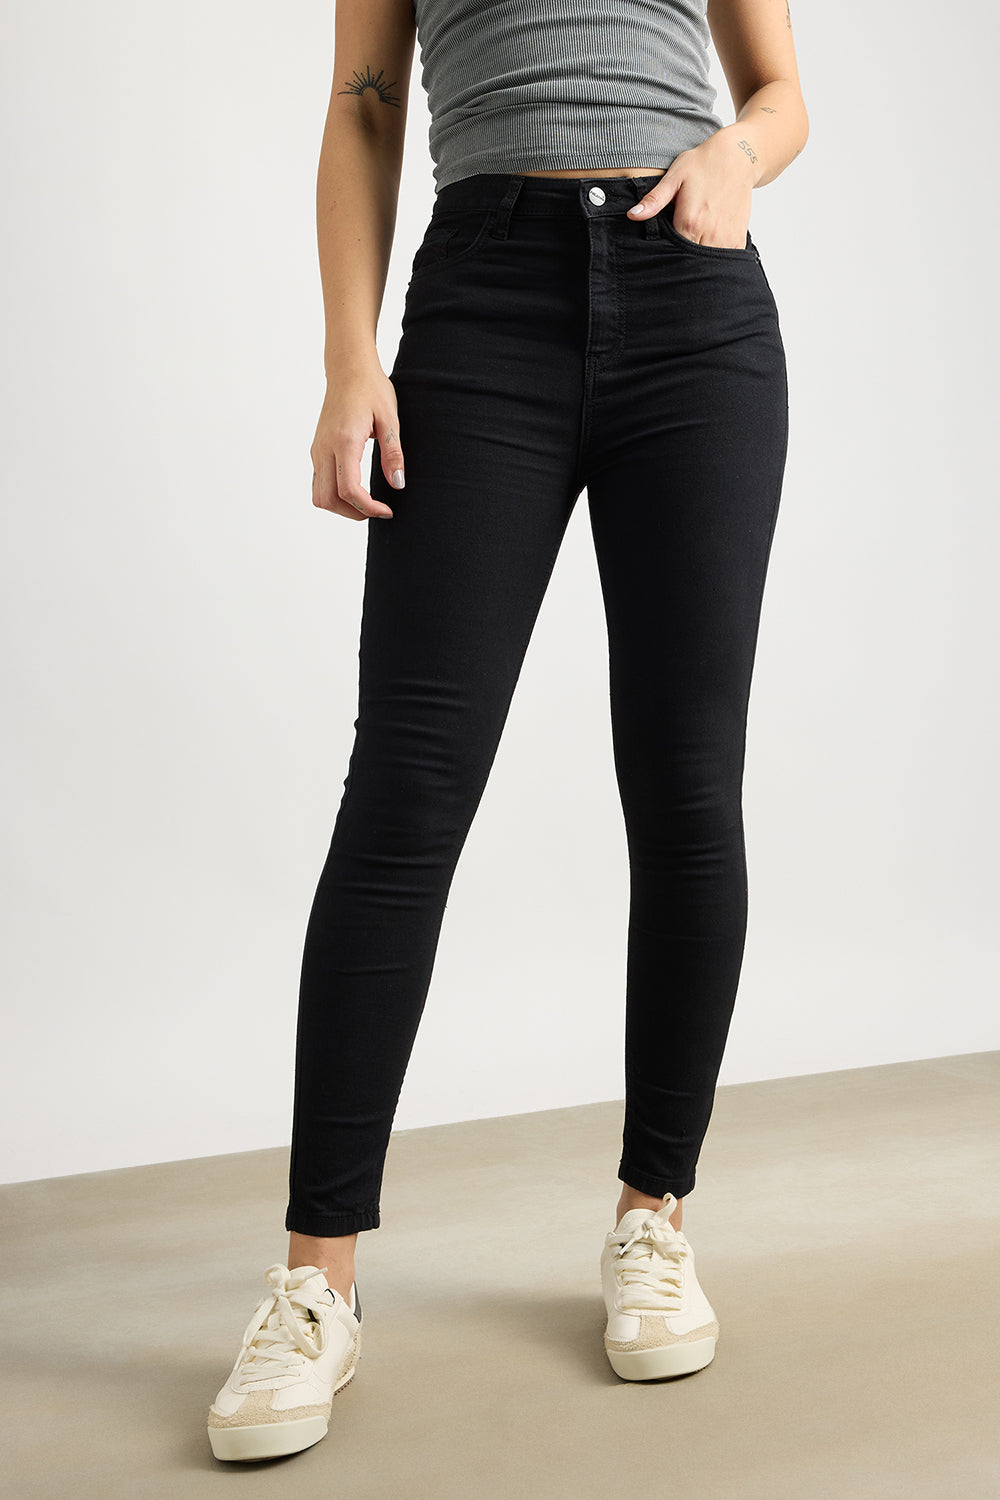 CARBON SKINNY FIT JEANS